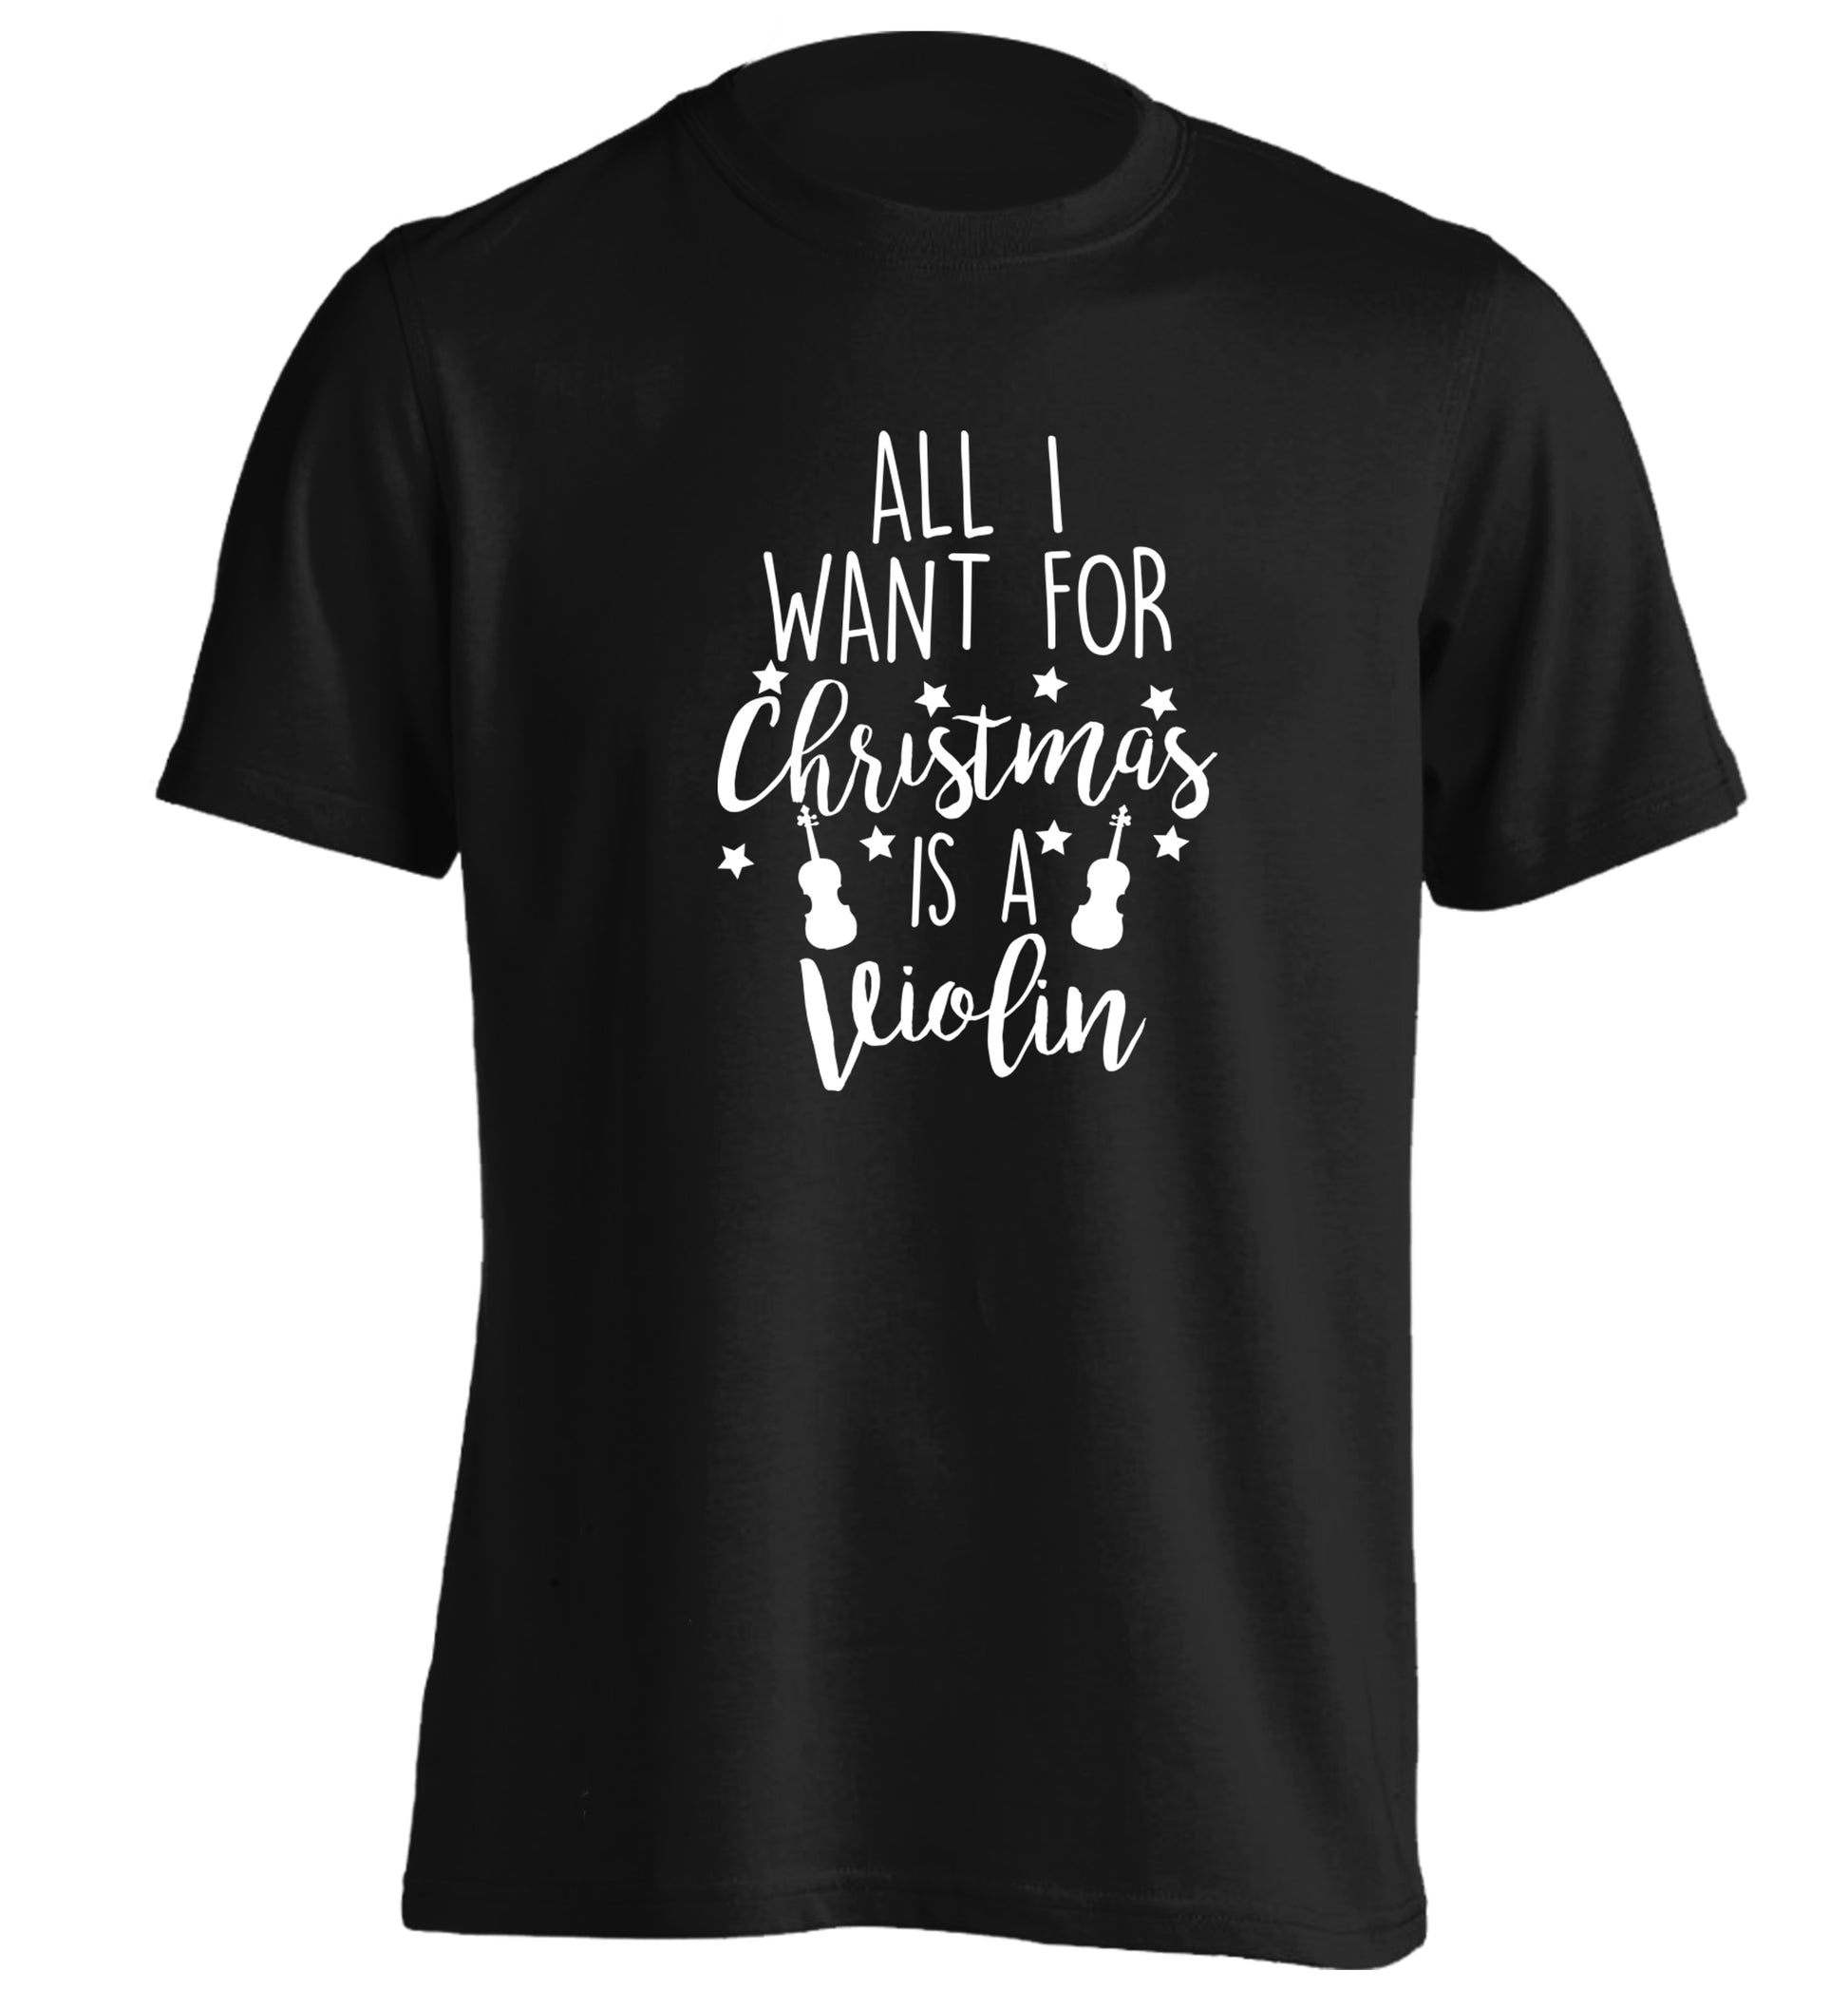 All I Want For Christmas is a Violin adults unisex black Tshirt 2XL